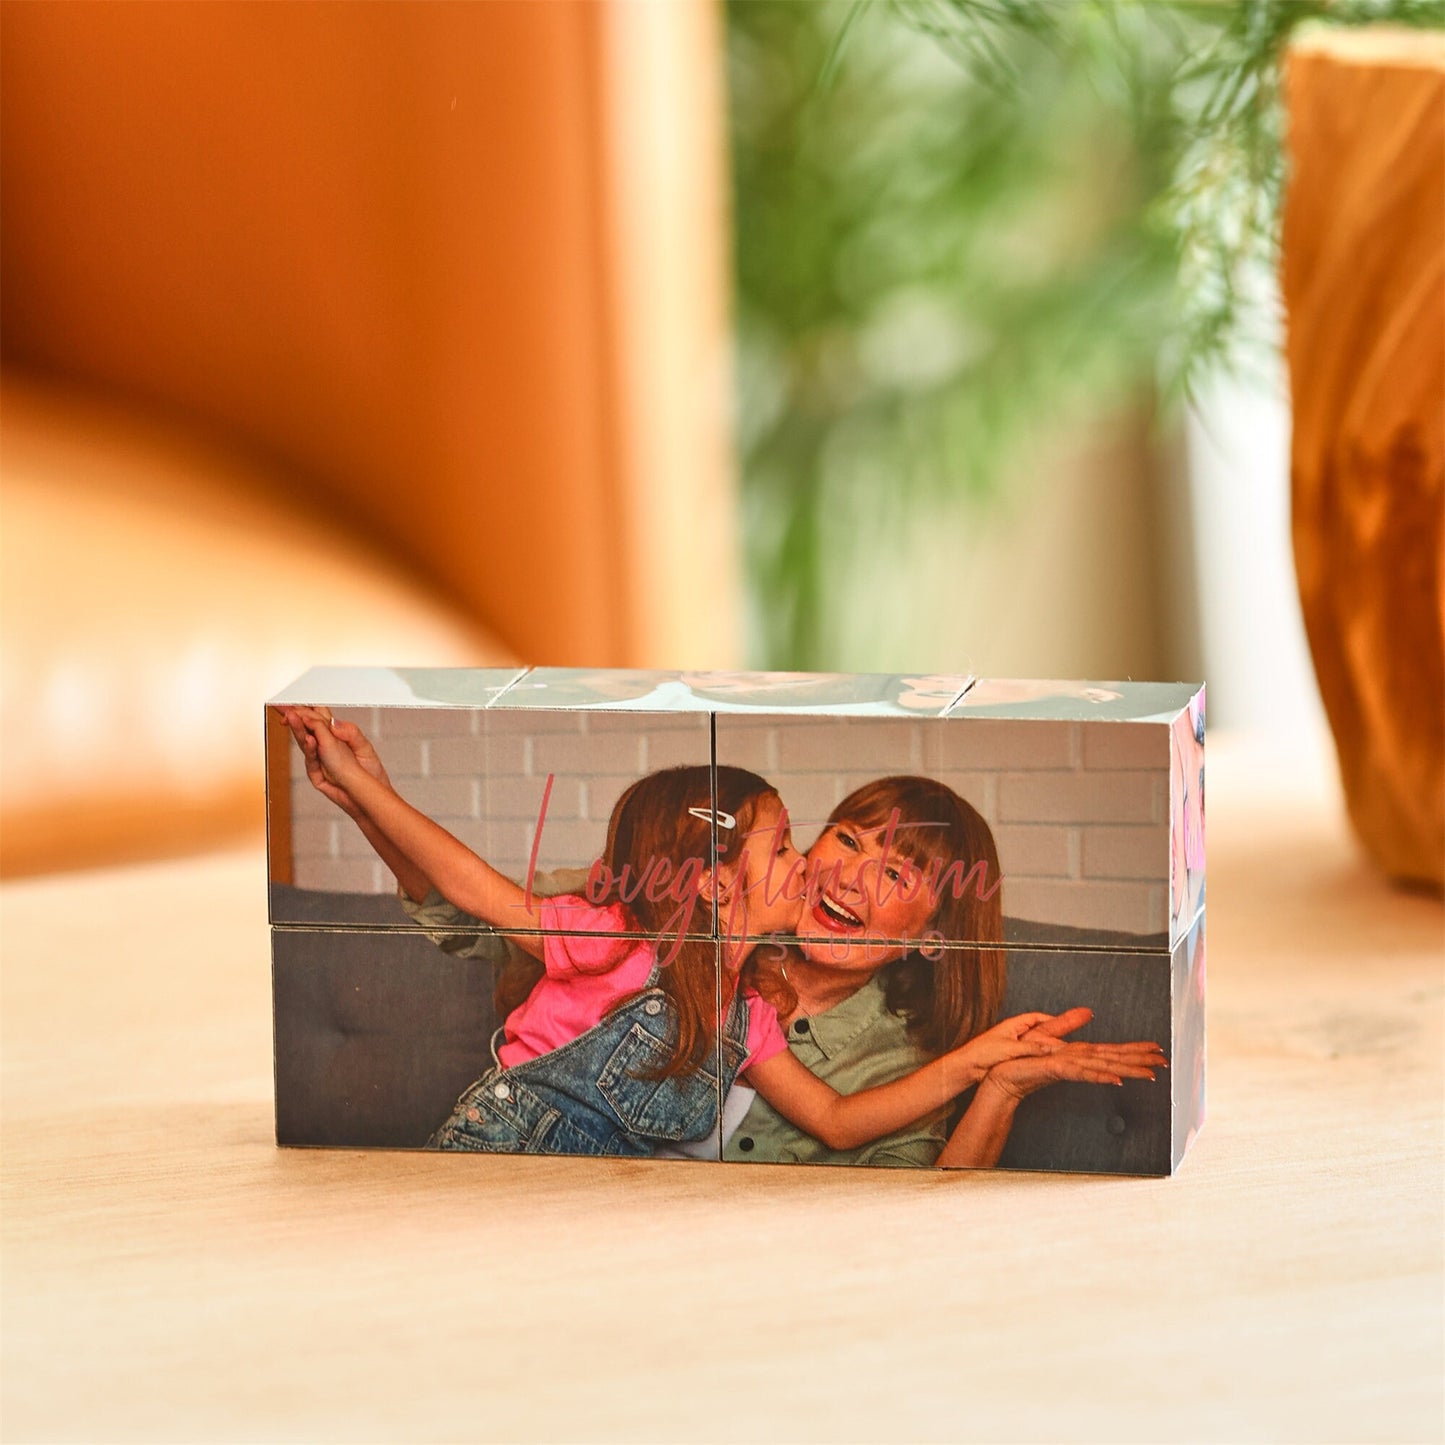 Custom Infinity Photo Cube, Blended mother gift, personal birthday surprise gifts, home decor photo cube mom memorial gift, gift for grandma